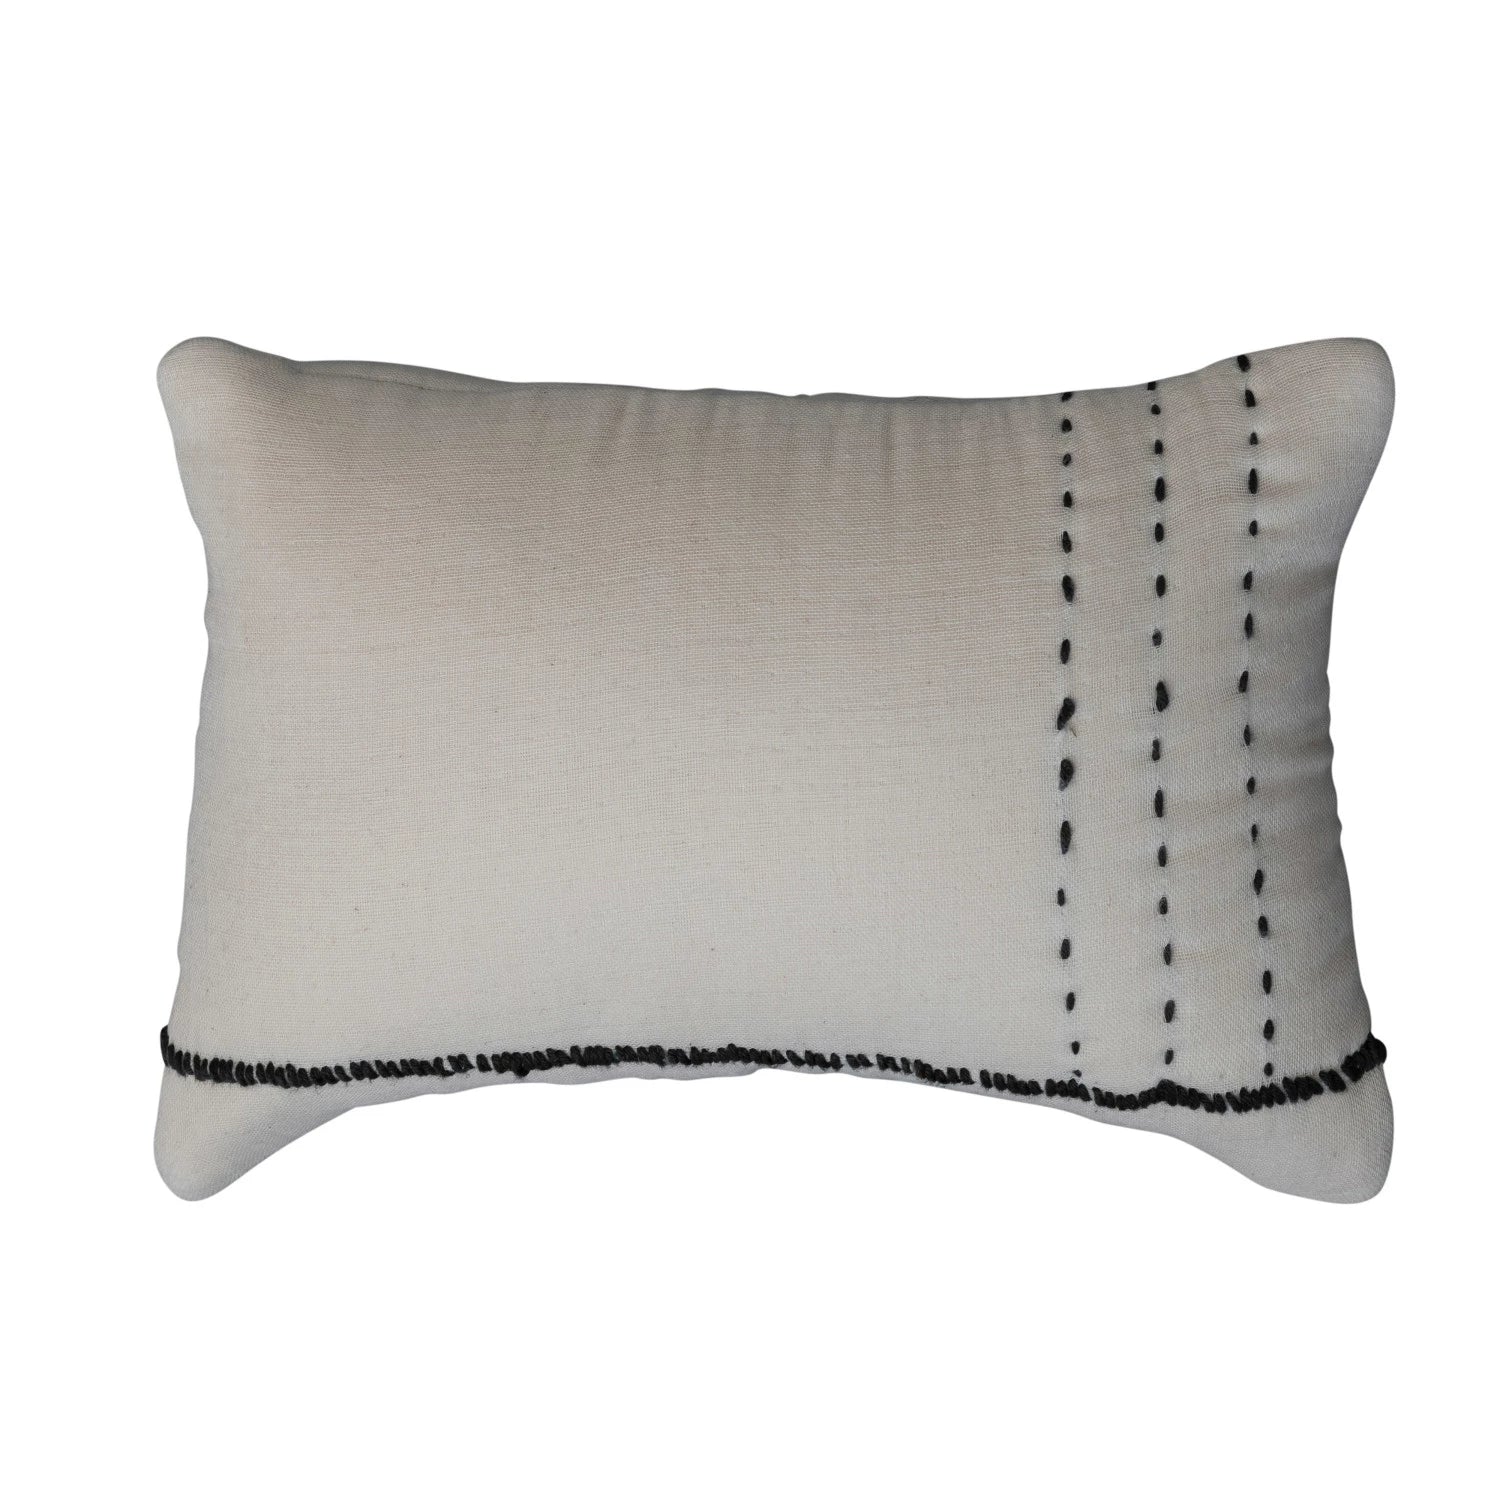 Hand Embroidery Pillow, The Feathered Farmhouse